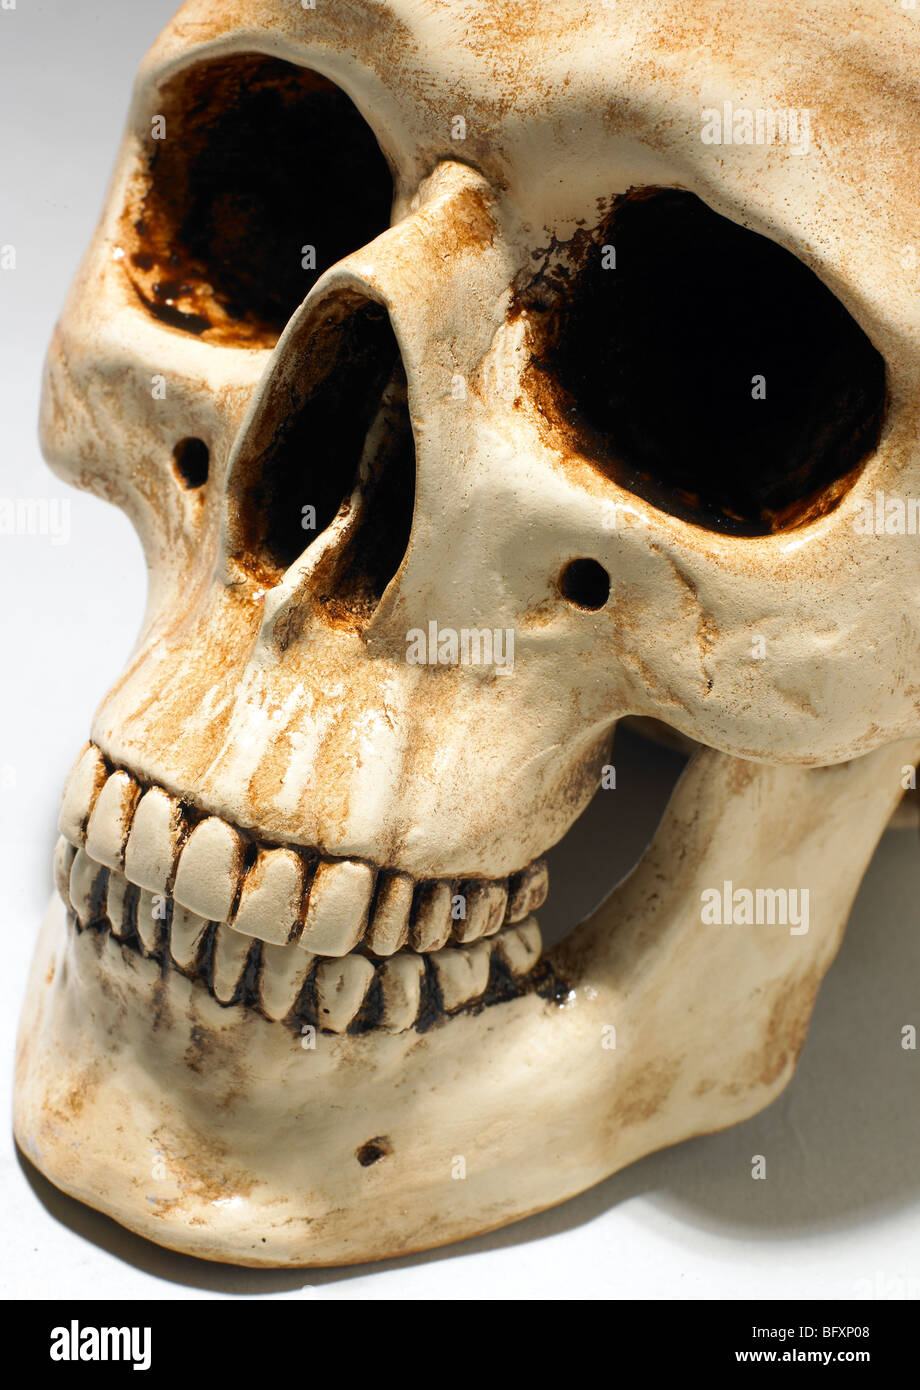 Part of a human skull Stock Photo